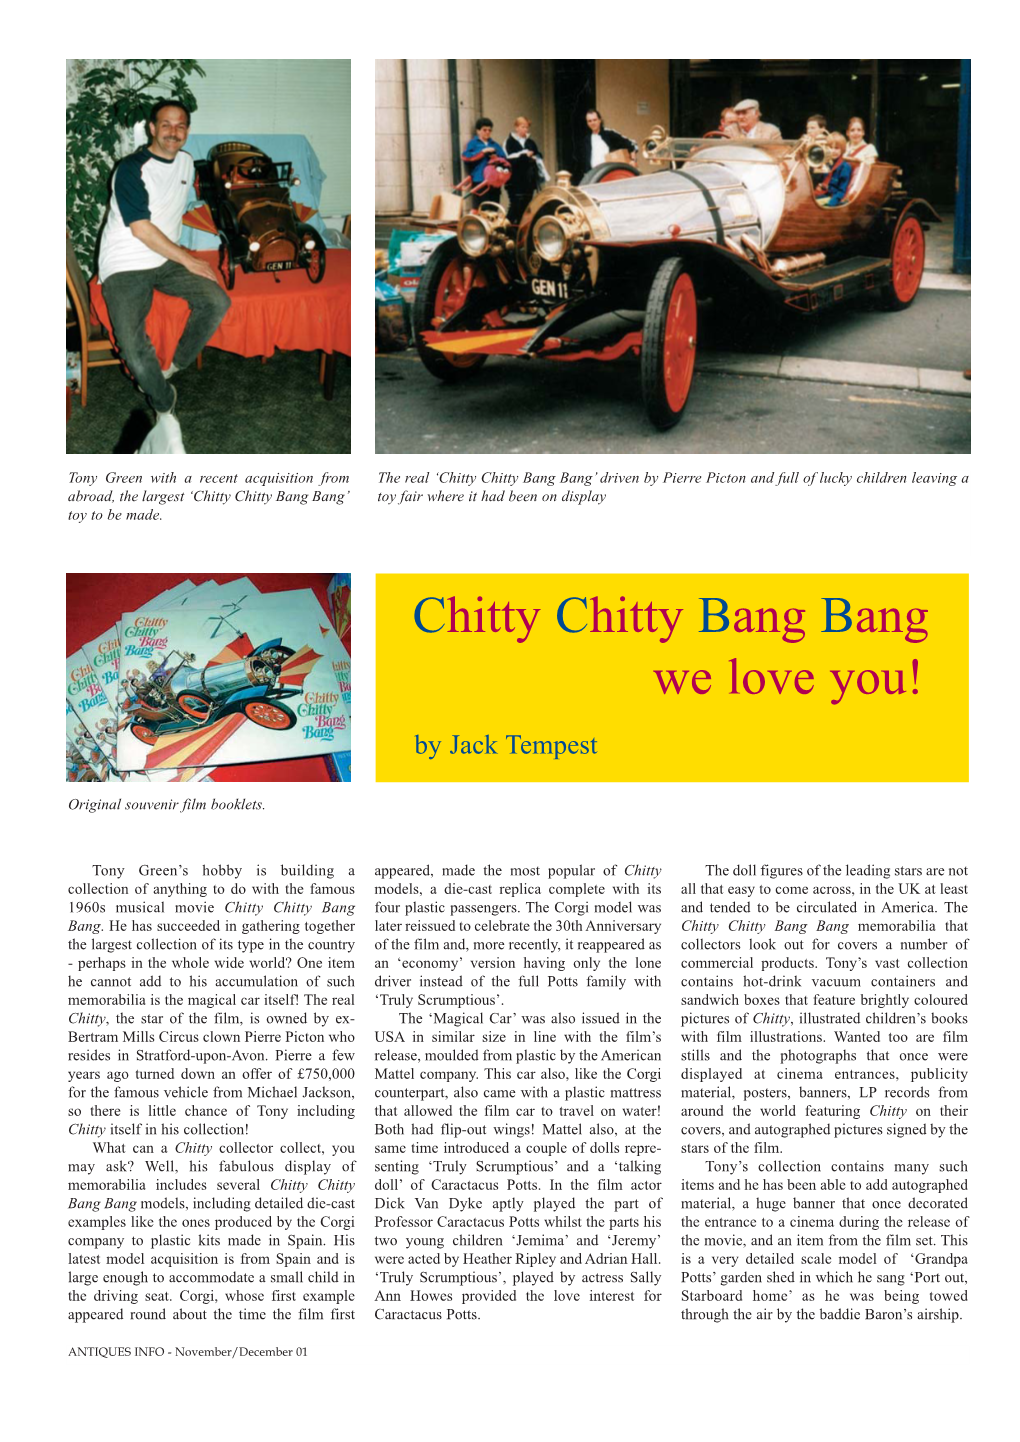 Chitty Chitty Bang Bang We Love You! by Jack Tempest